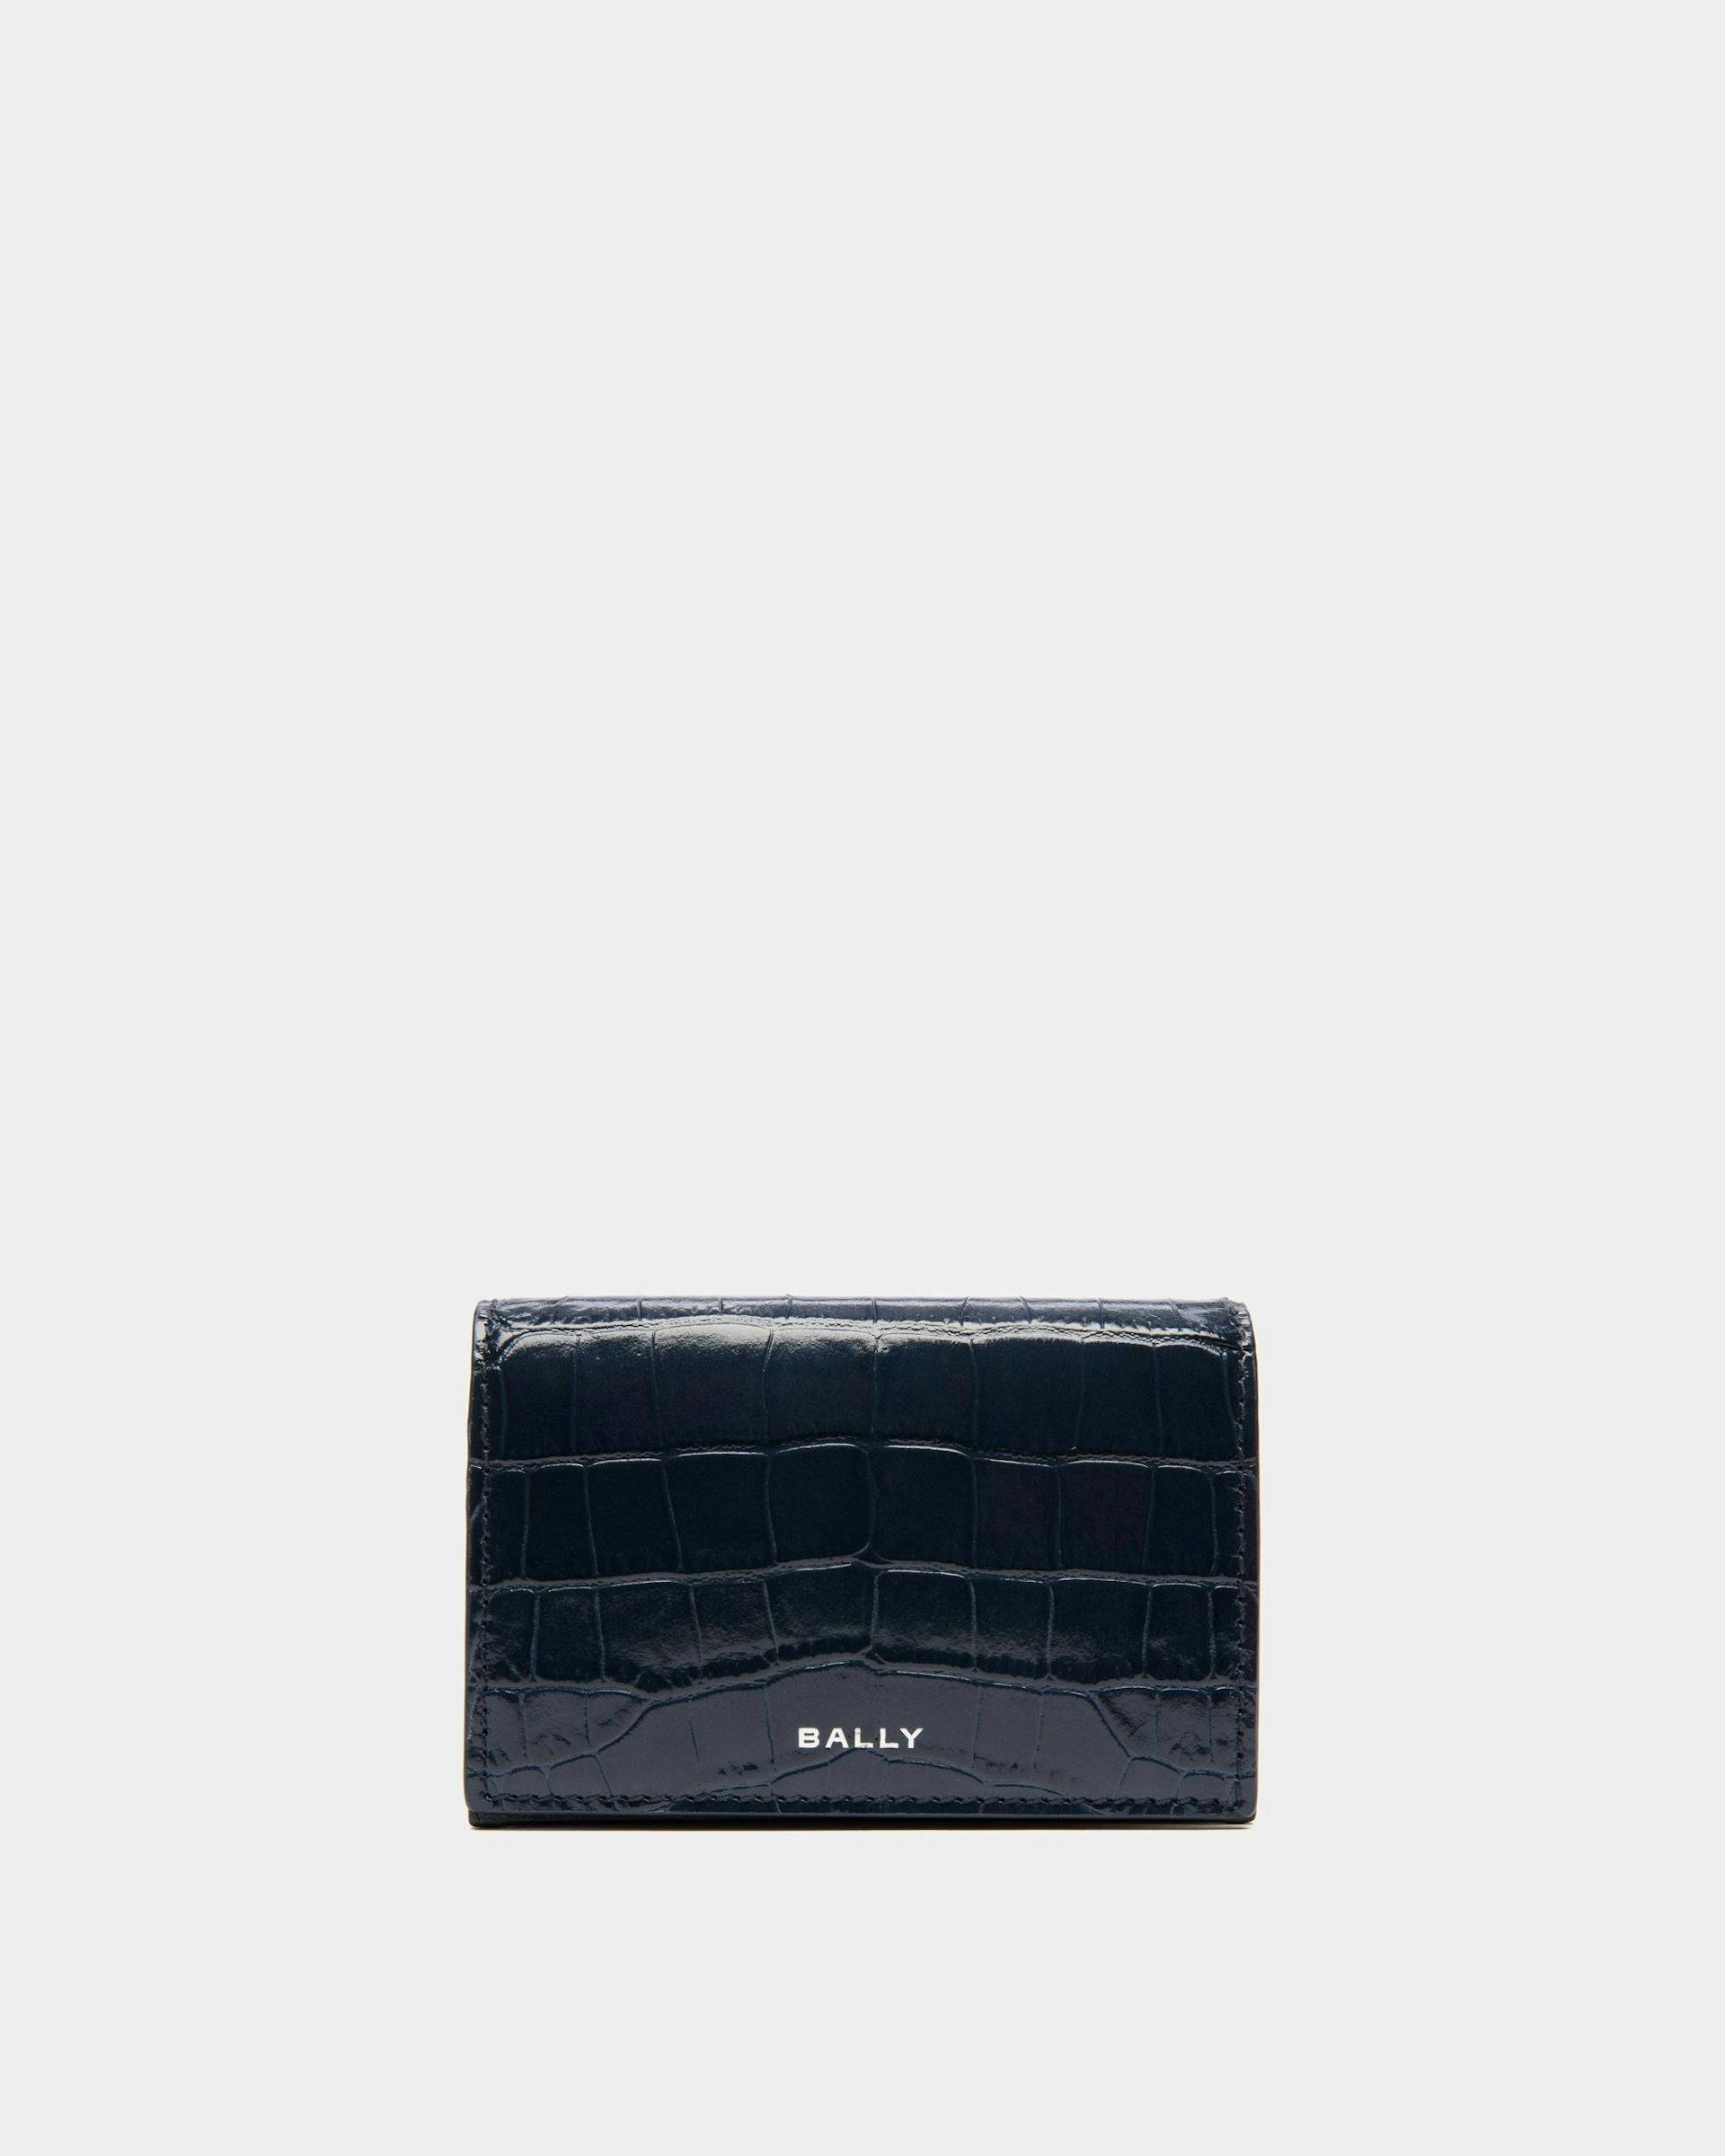 Men's Busy Bally Business Card Case in Crocodile Print Leather | Bally | Still Life Front